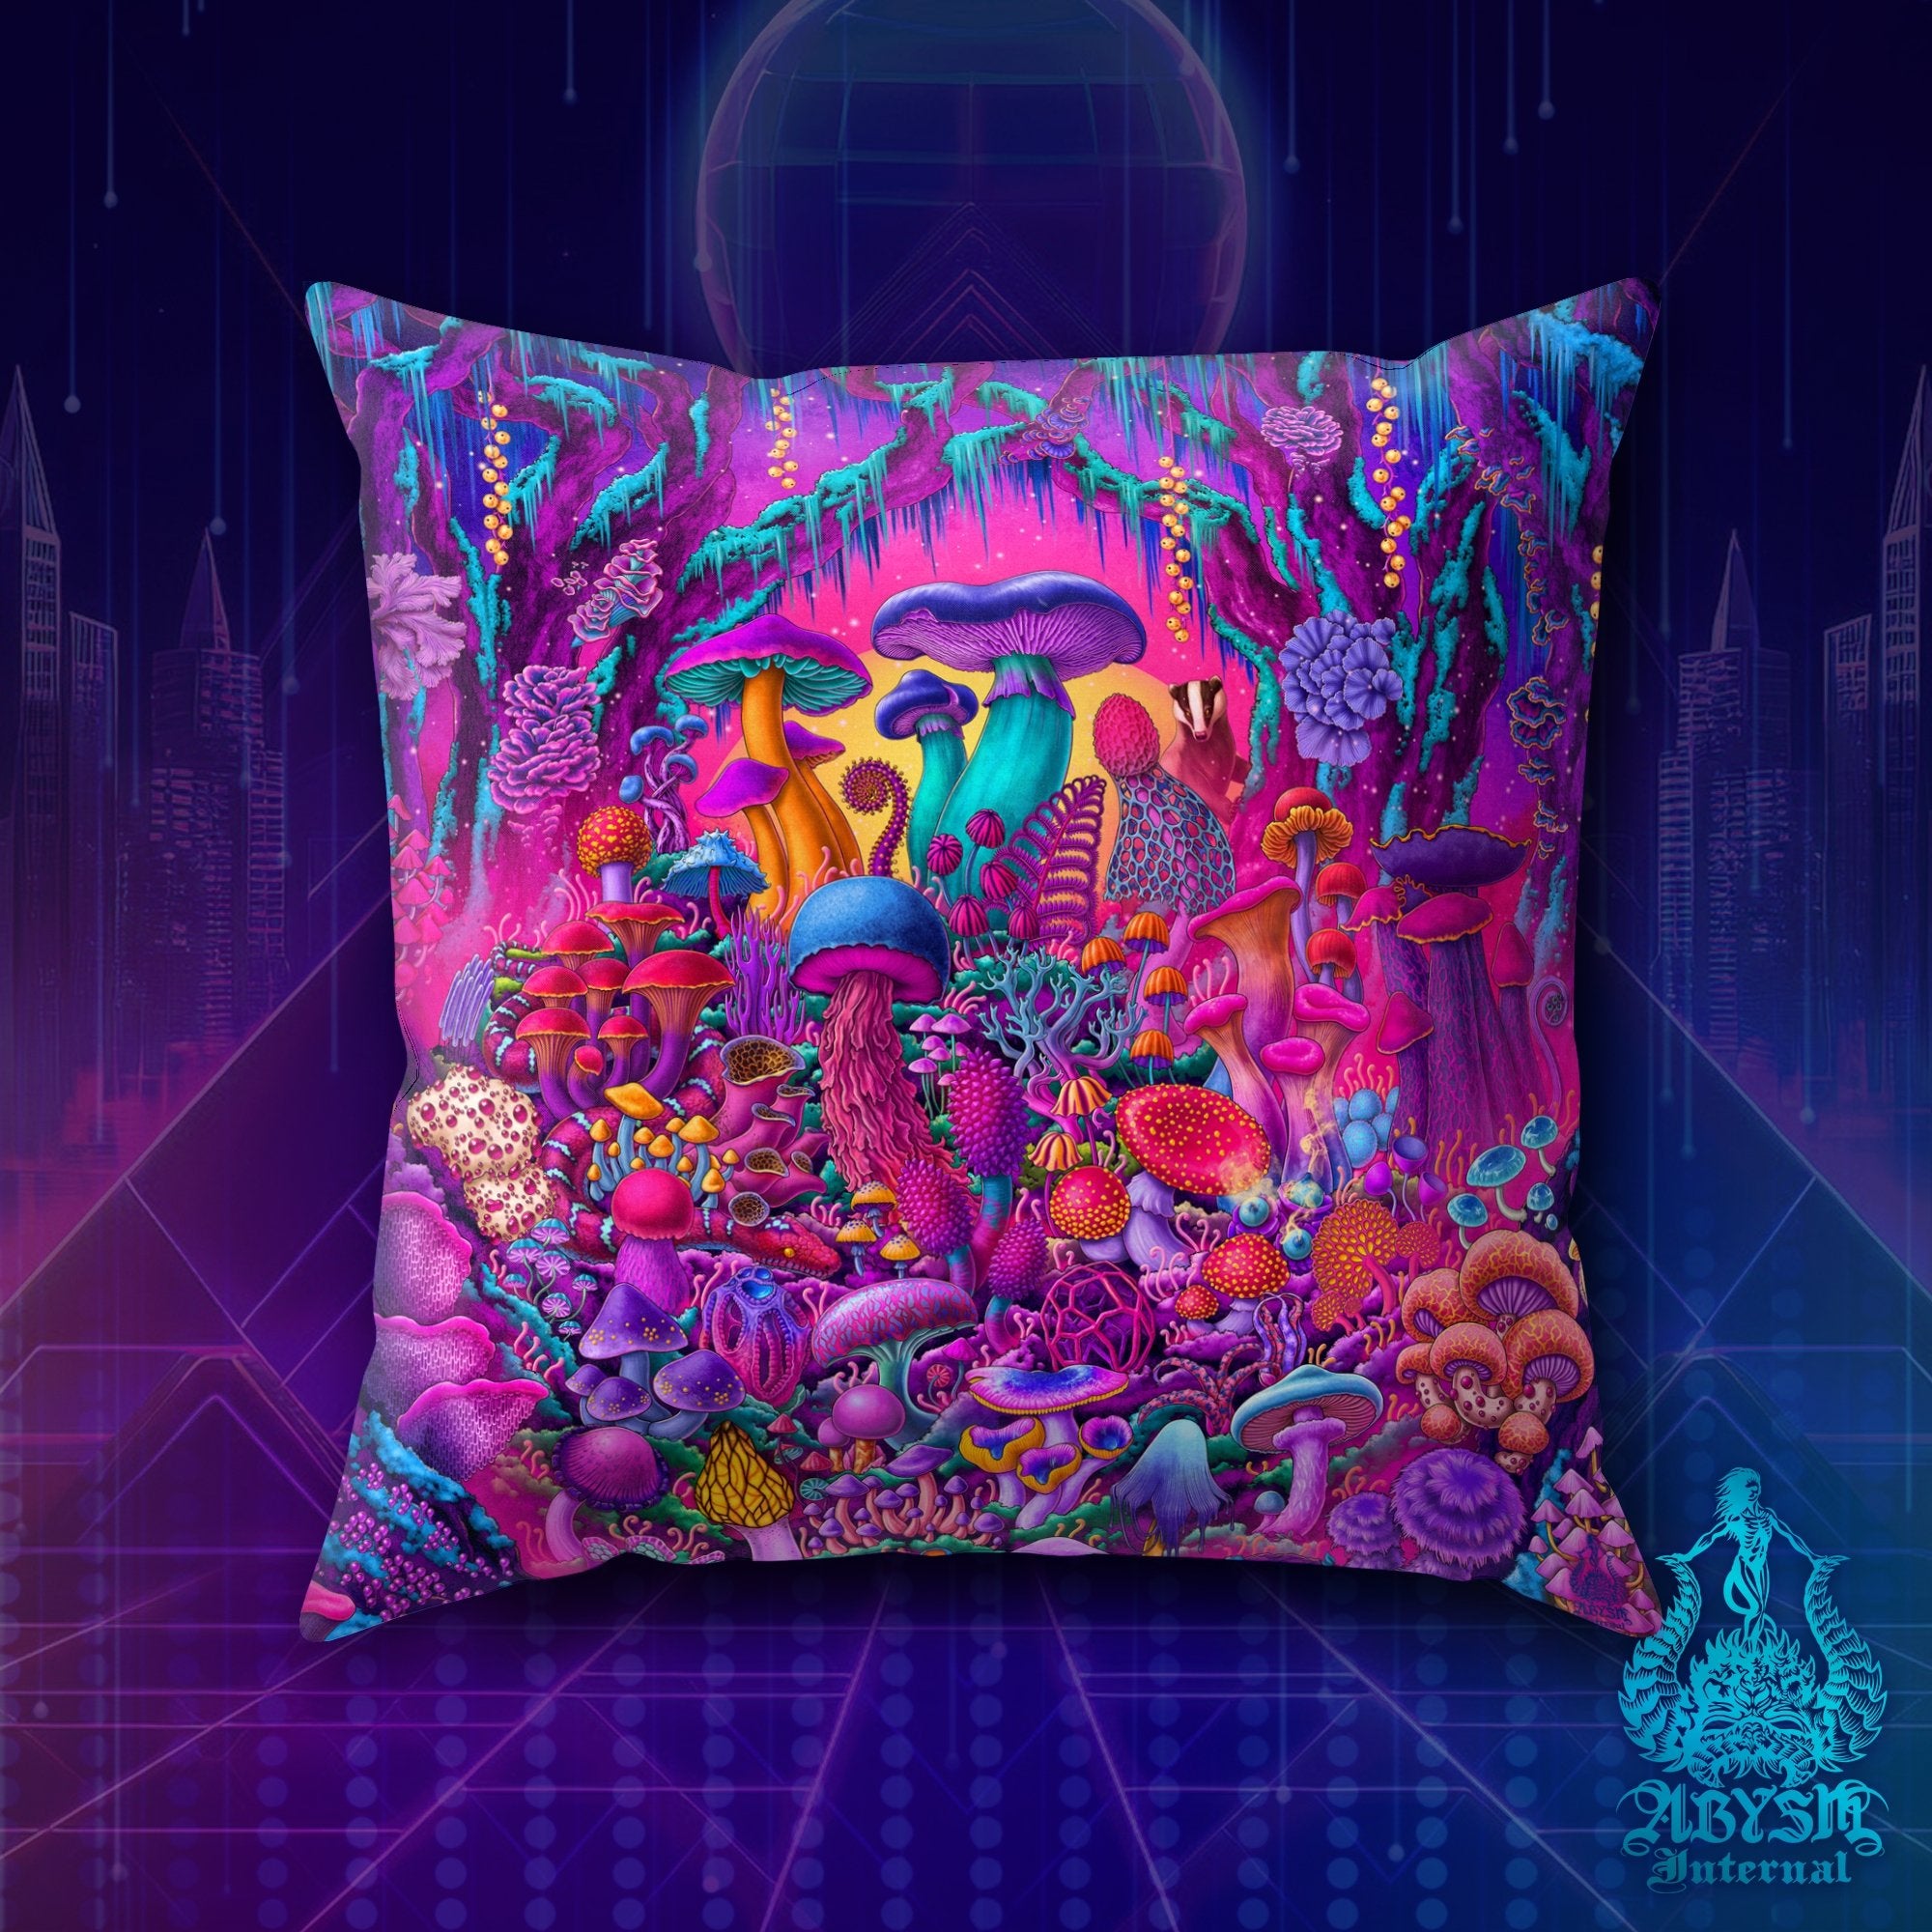 Psychedelic Mushrooms Throw Pillow, Magic Shrooms, Vaporwave Decorative Accent Cushion, Retrowave 80s Room Decor, Synthwave Art Print - Abysm Internal